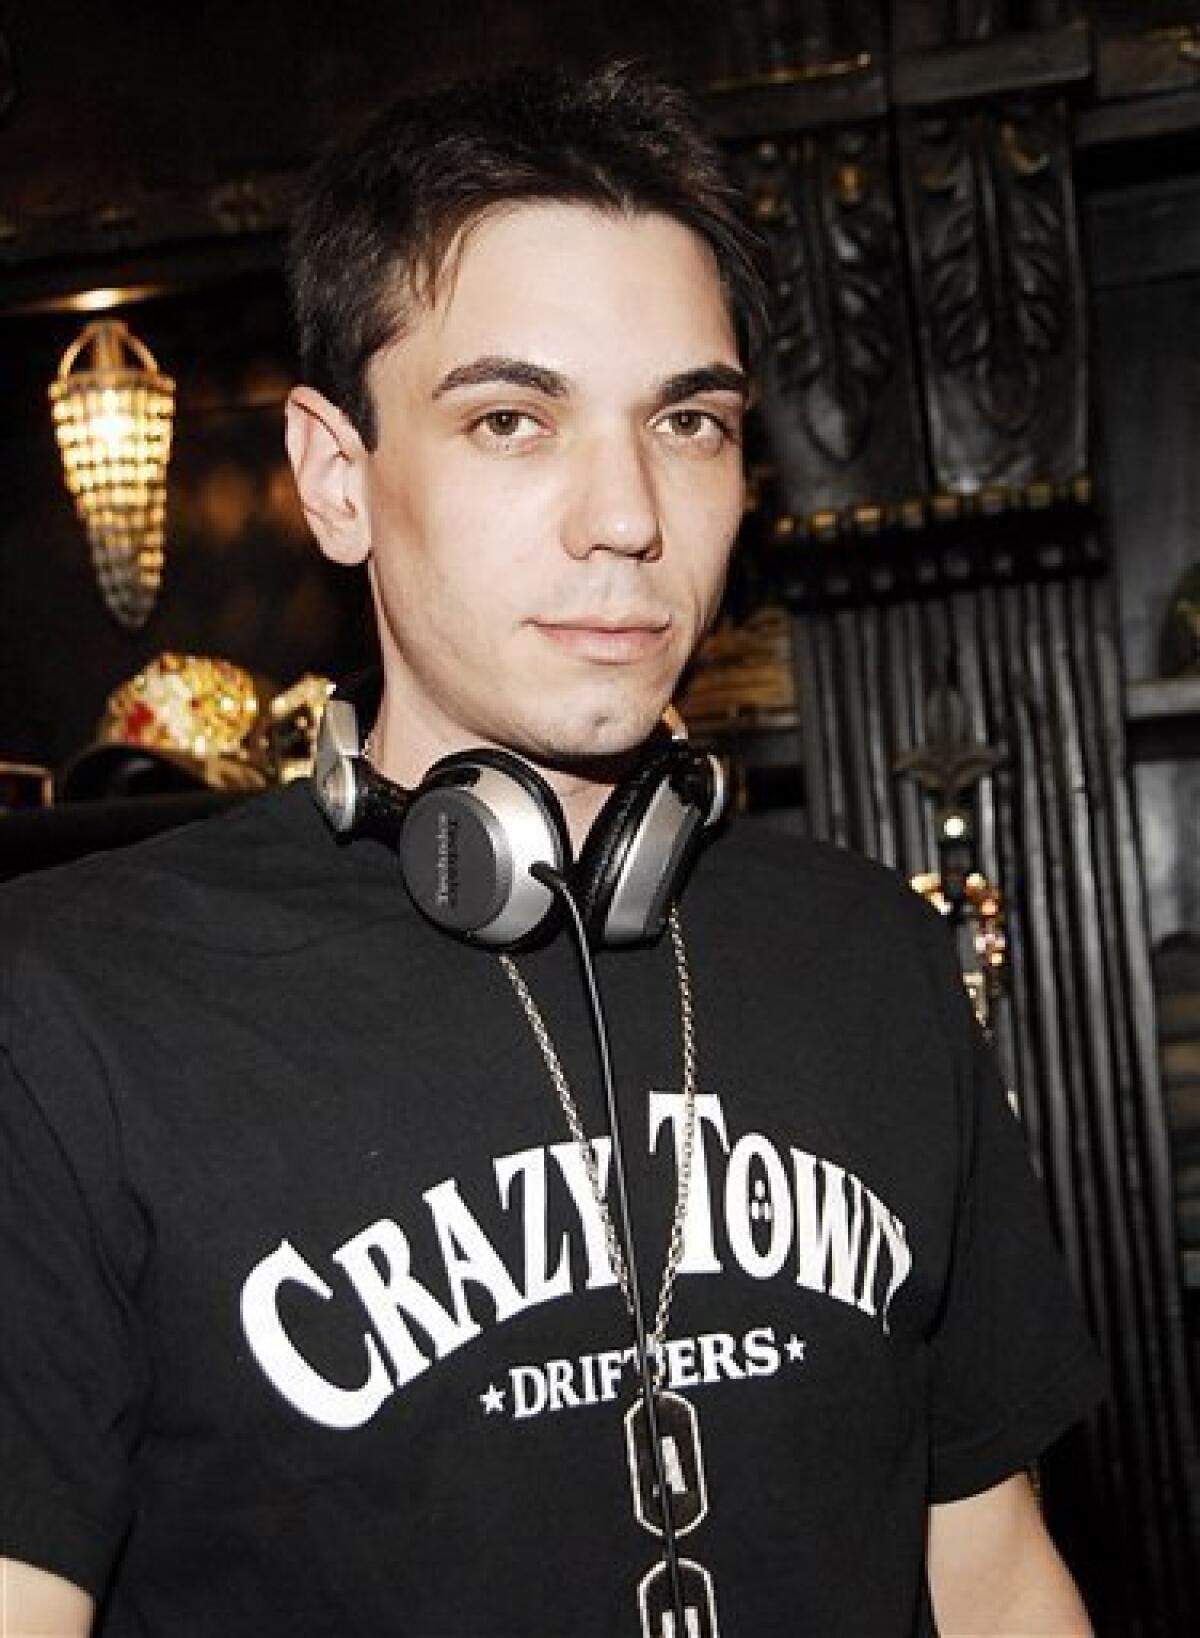 In this March 18, 2006 photo, celebrity disc jockey Adam Goldstein, also known as DJ AM, spins records at the Moody Blues clothing store opening in Scottsdale, Ariz. A law enforcement official says the celebrity disc jockey known as DJ AM has been found dead in a New York City apartment. .(AP Photo/Dan Steinberg)